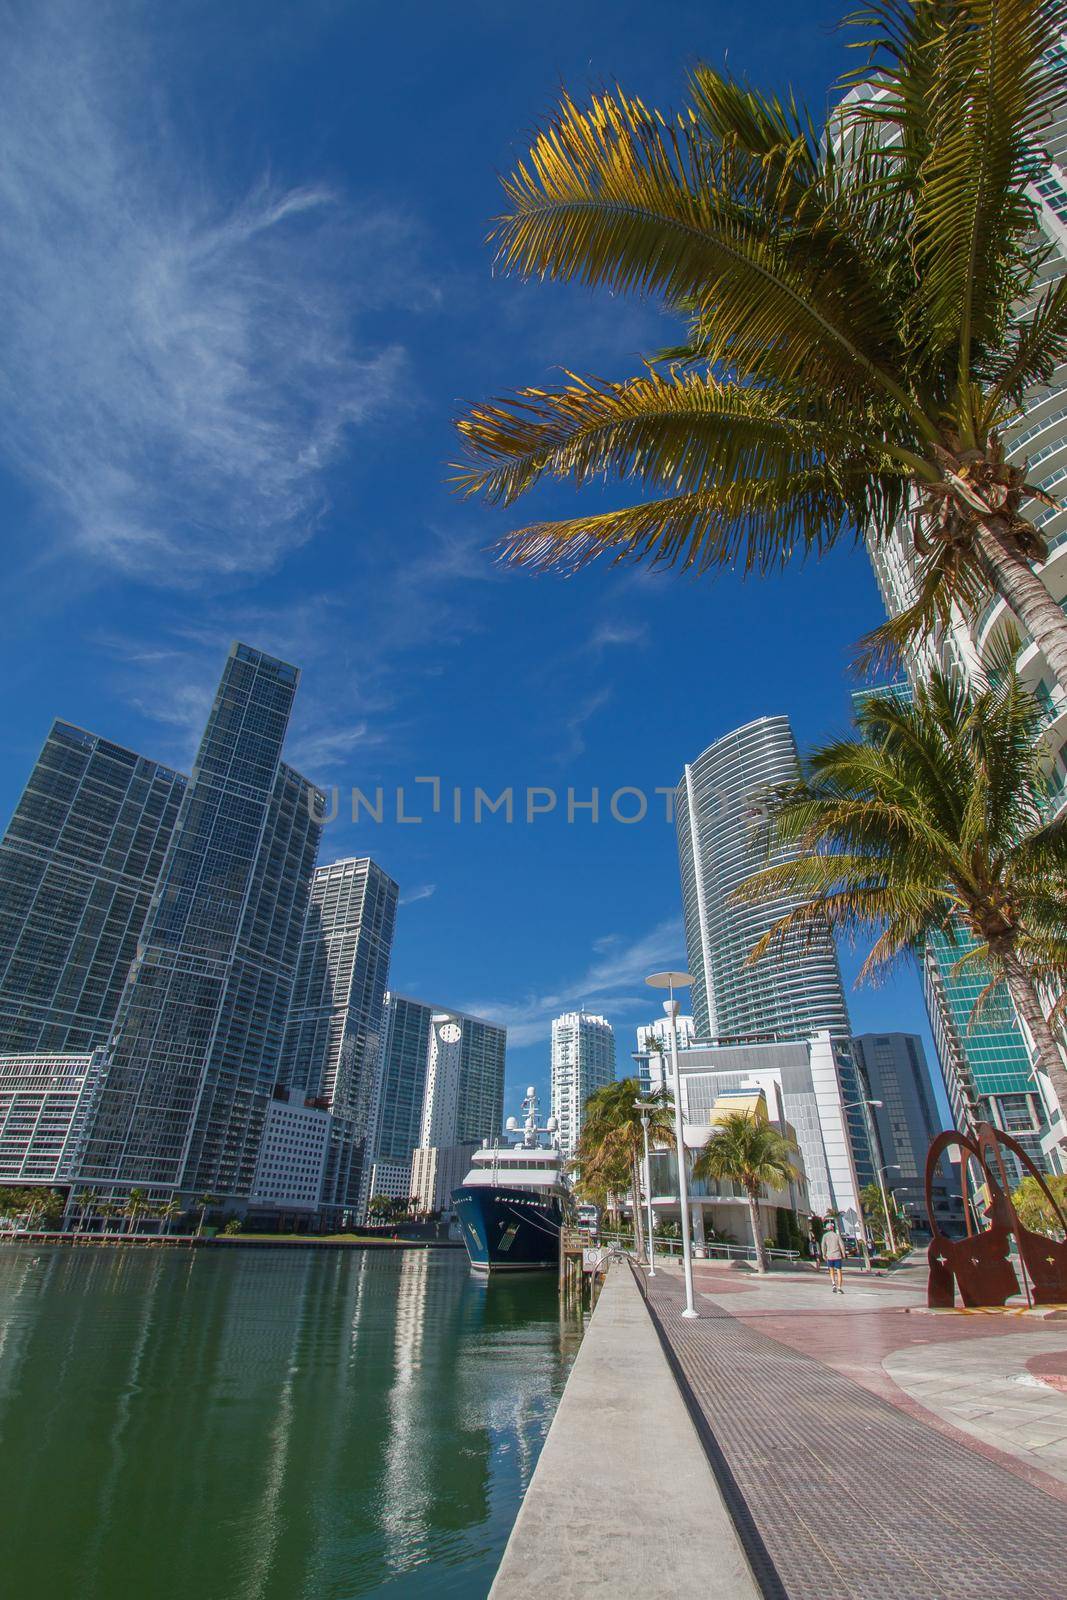 Miami Downtown River Cityscape Along the Brickell Area. Wide Angle Shot with Palms, Skyscrapers and Blue Sky.